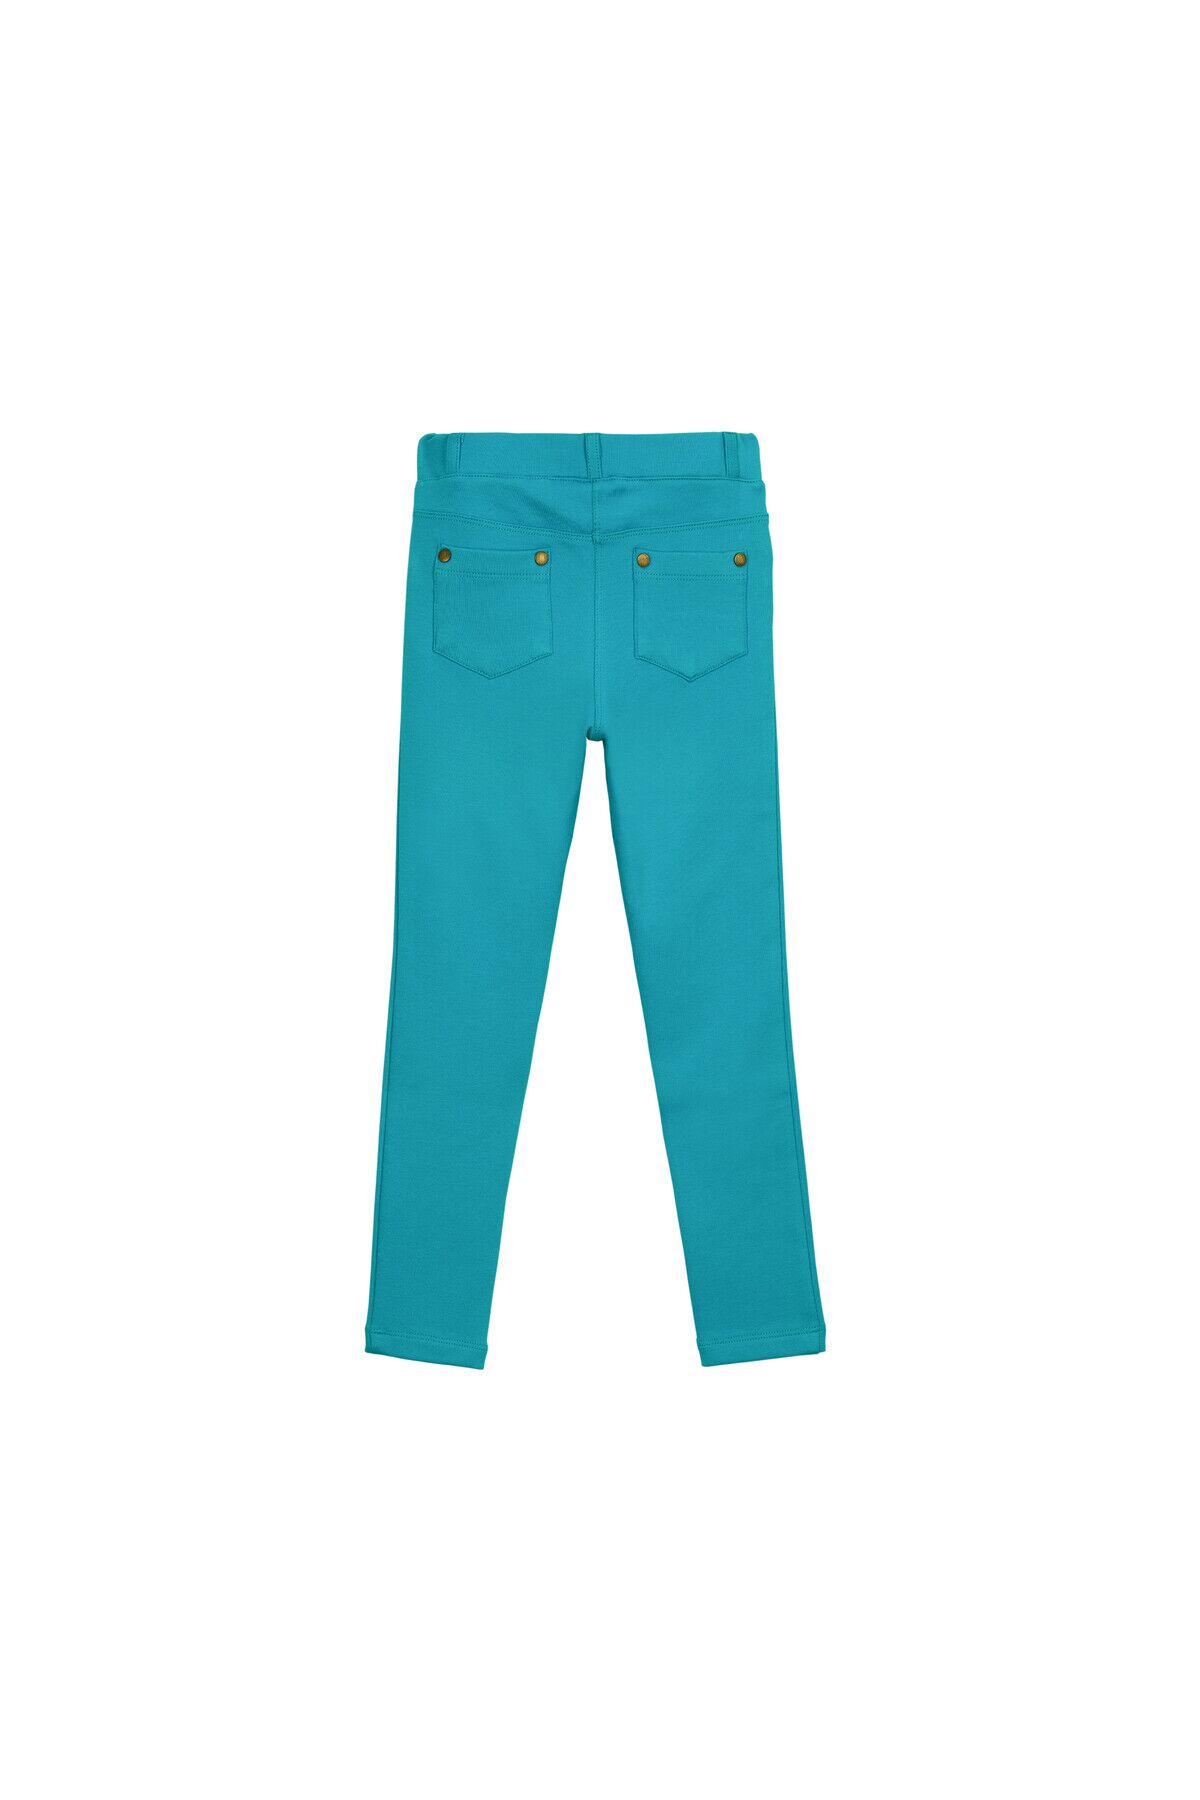 Turquoise Kids Pants With Two Pockets 